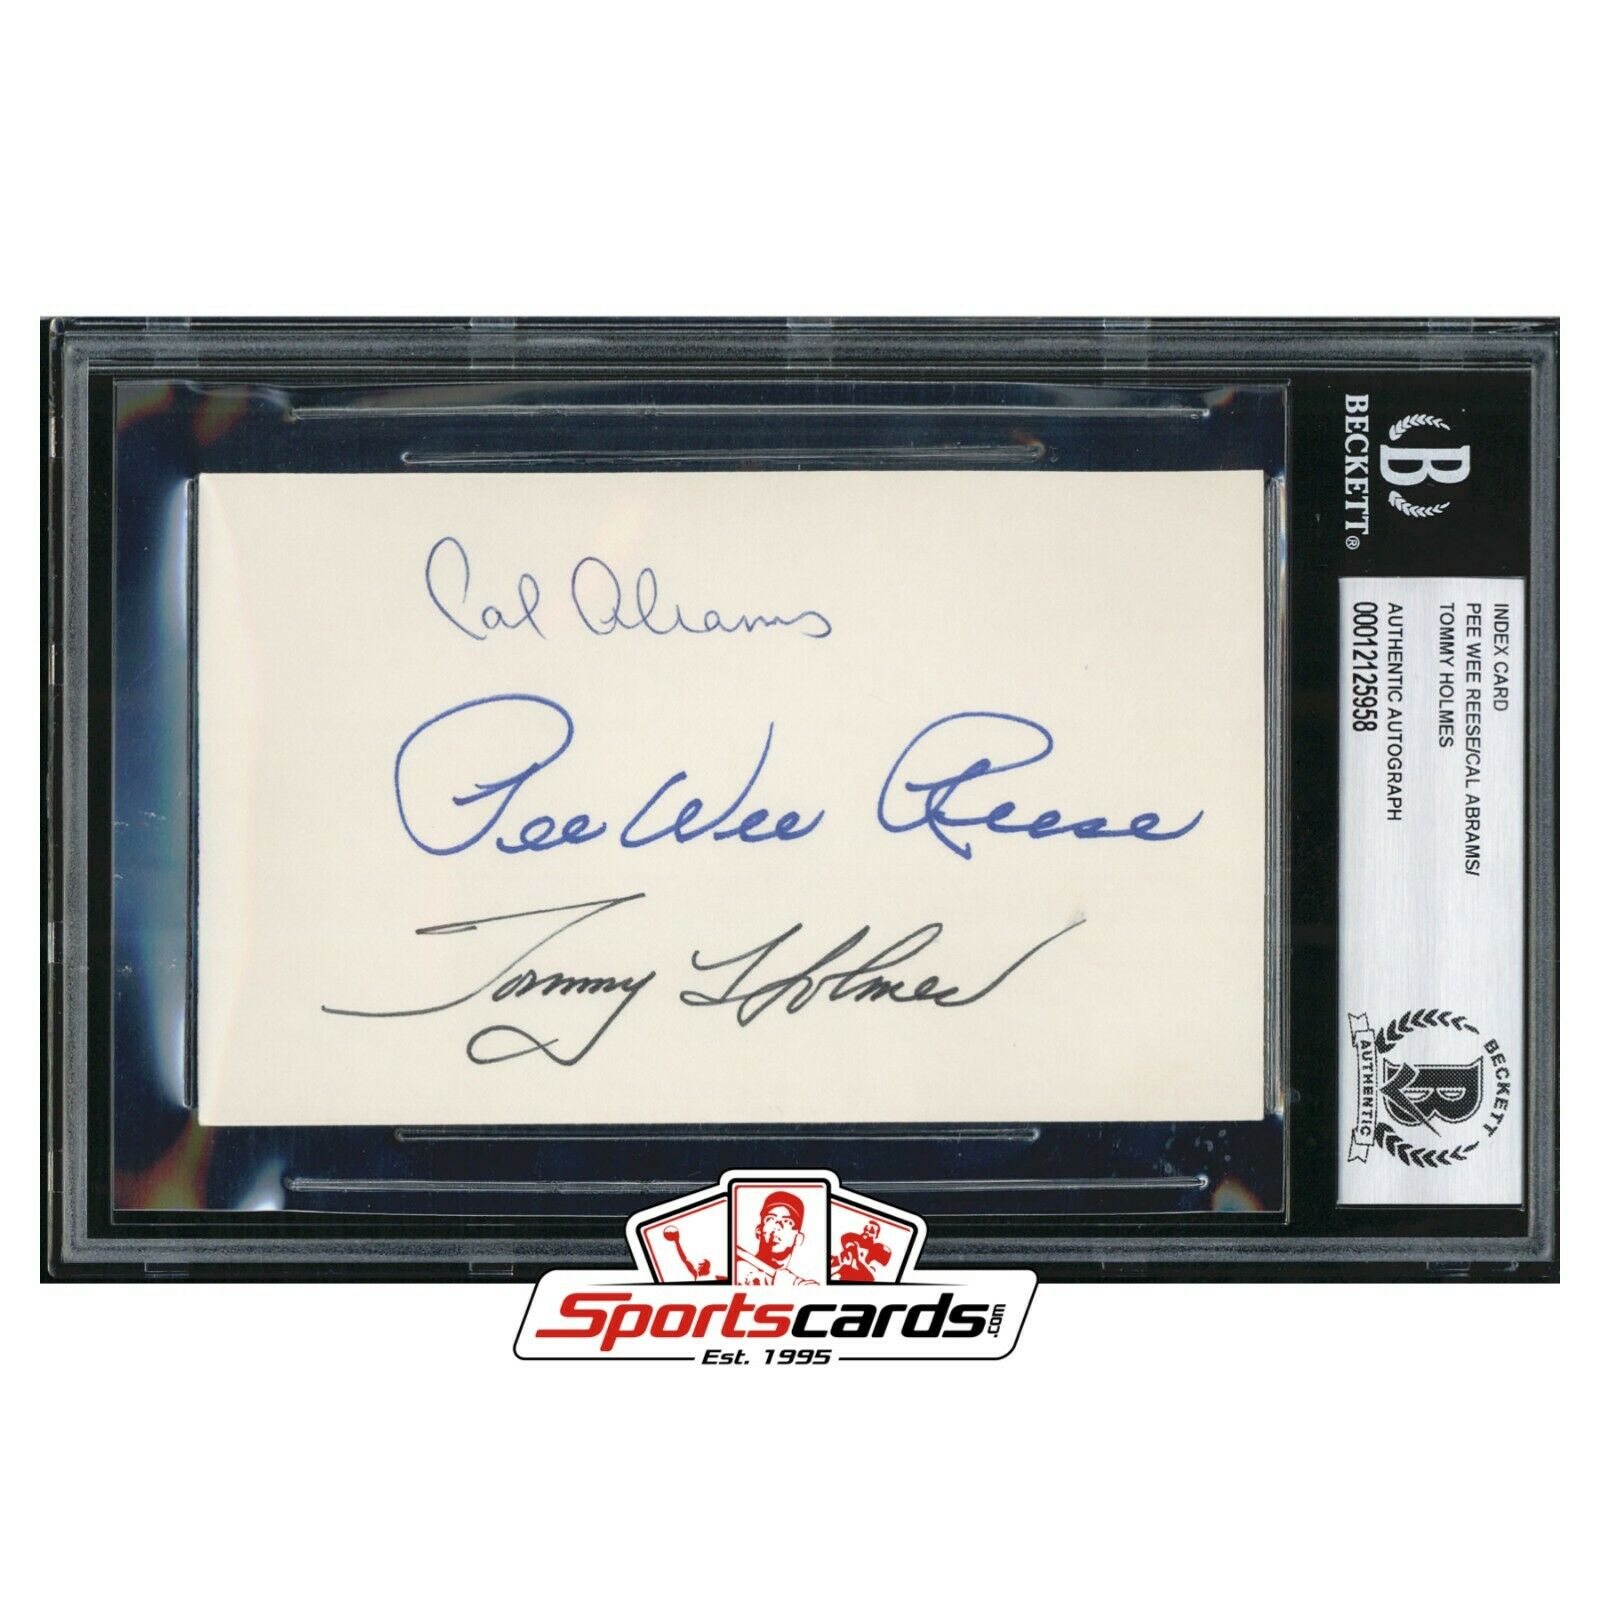 Pee Wee Reese Cal Abrams Tommy Holmes Signed 3x5 Index Beckett Authentic Auto